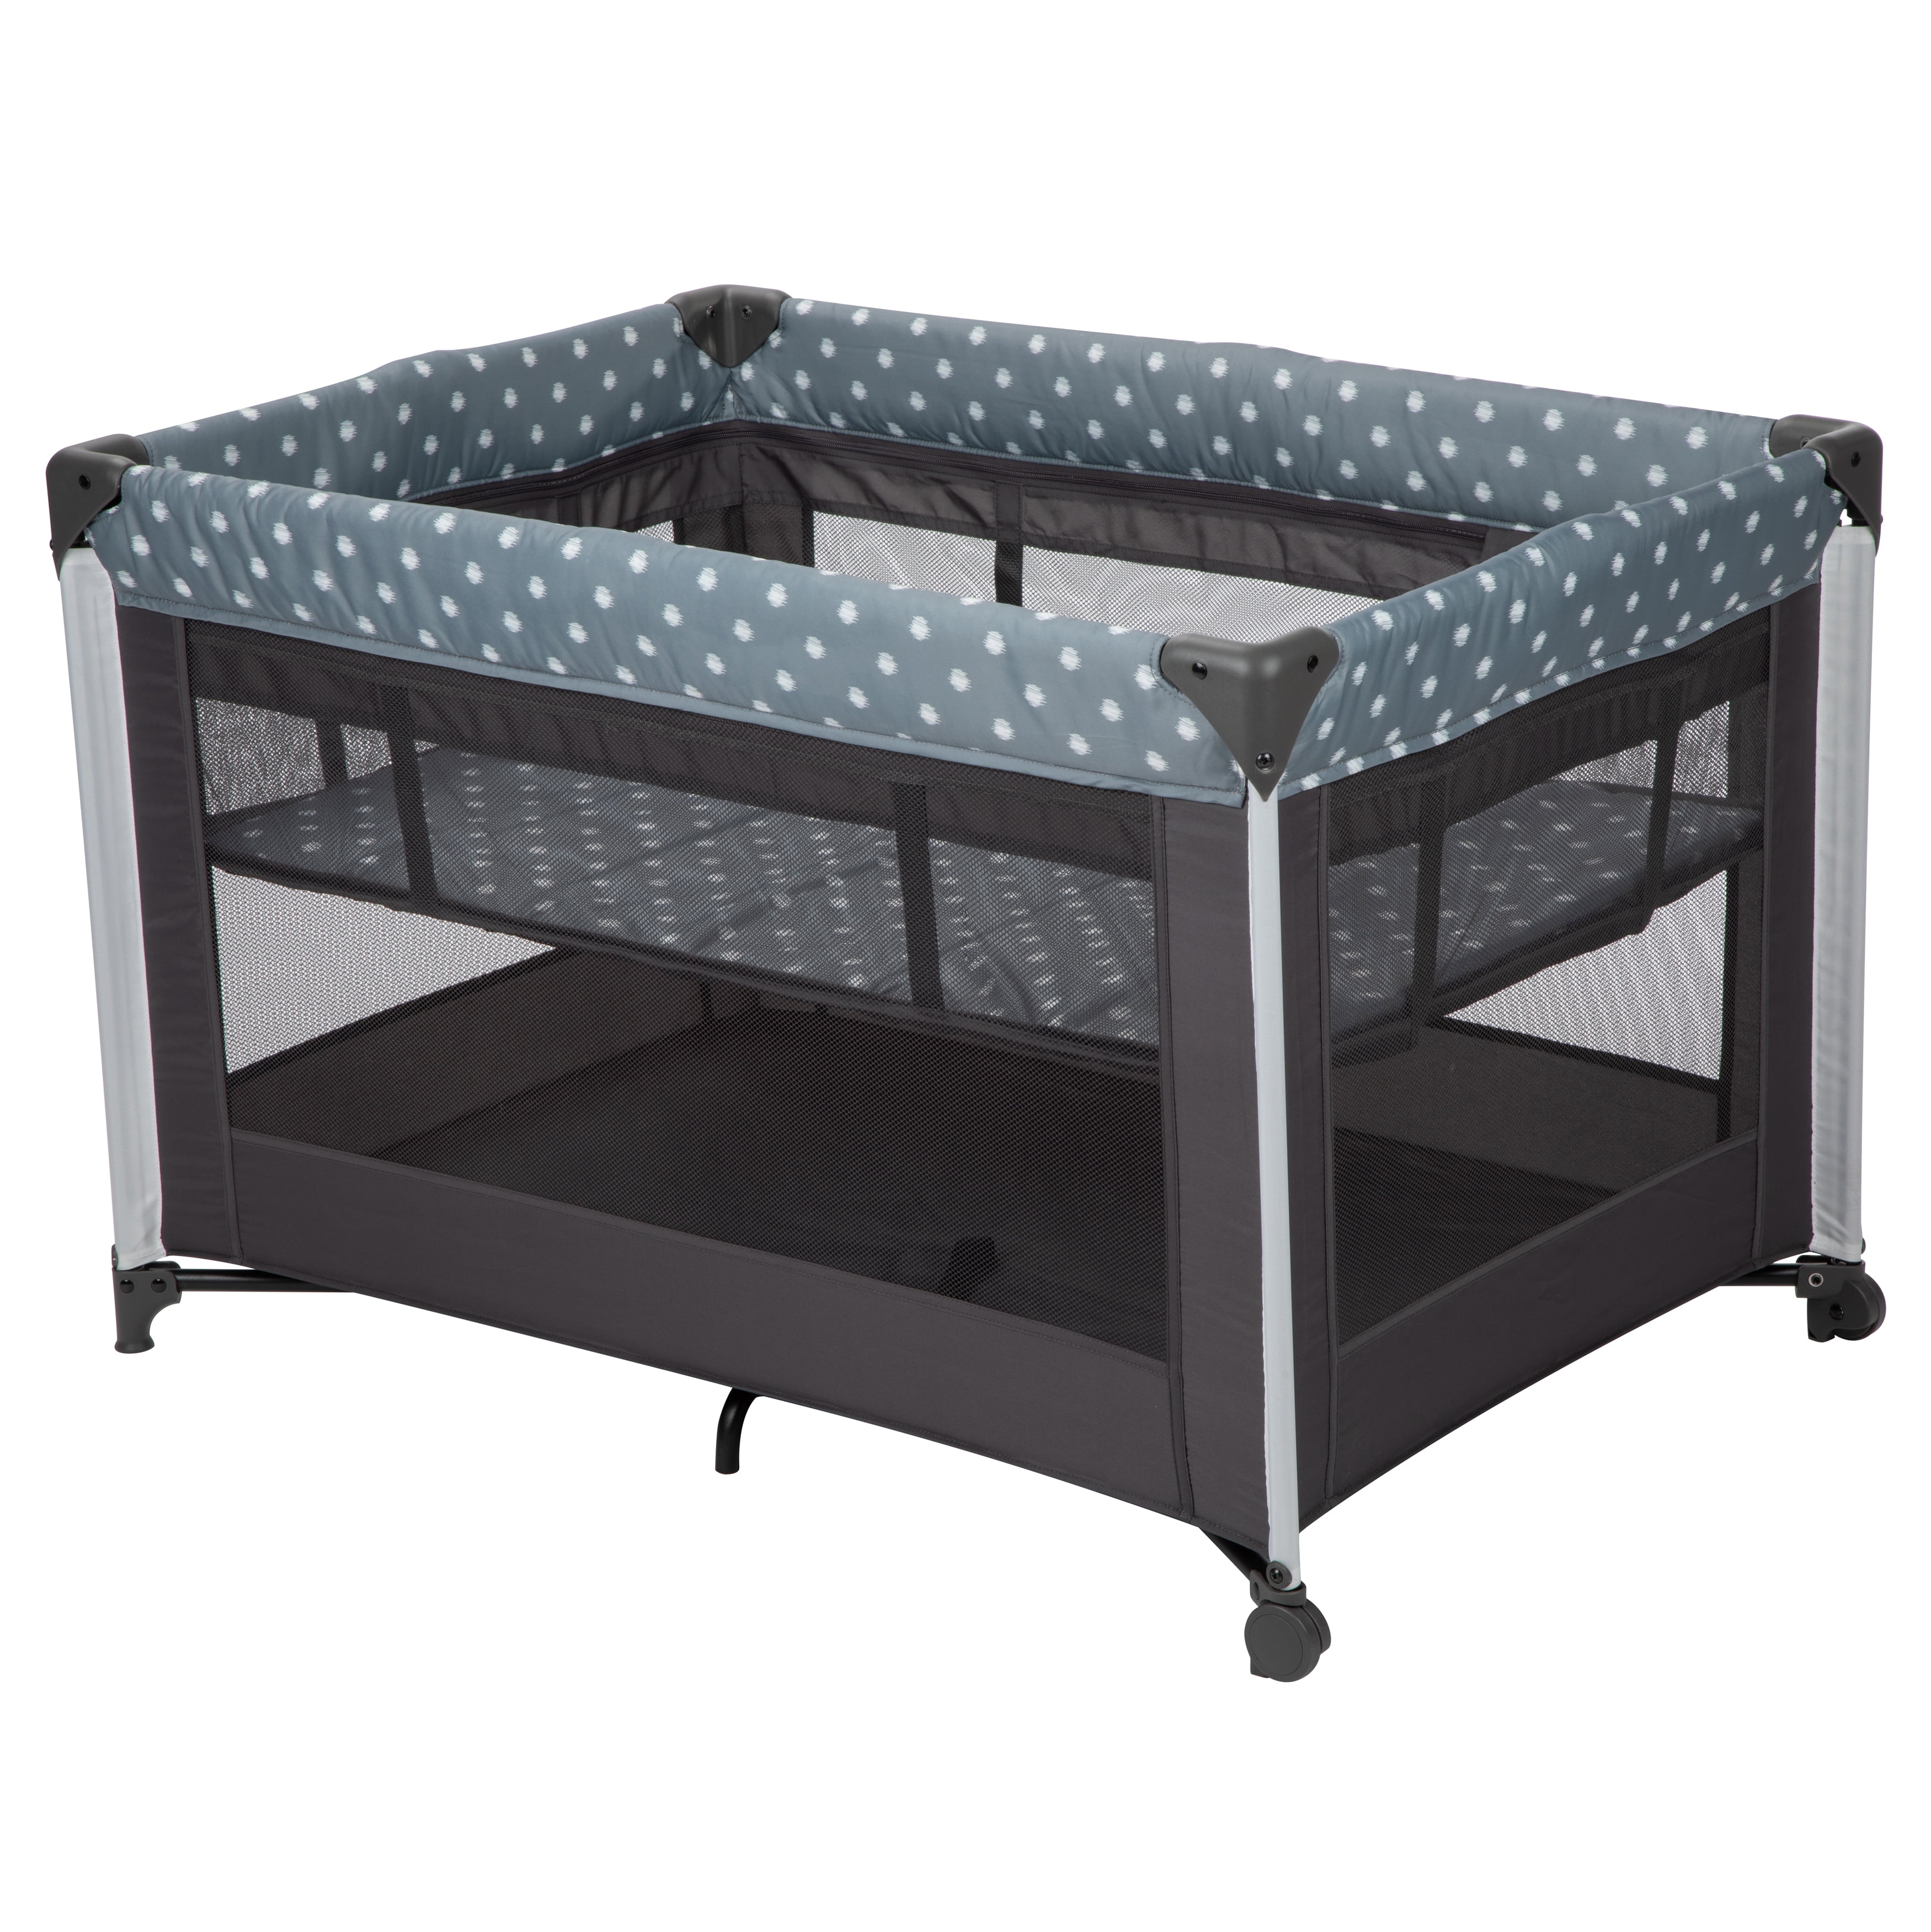 Aspery New and Top Rated Fast Shipping!!! Graco Pack 'n Play Playard 